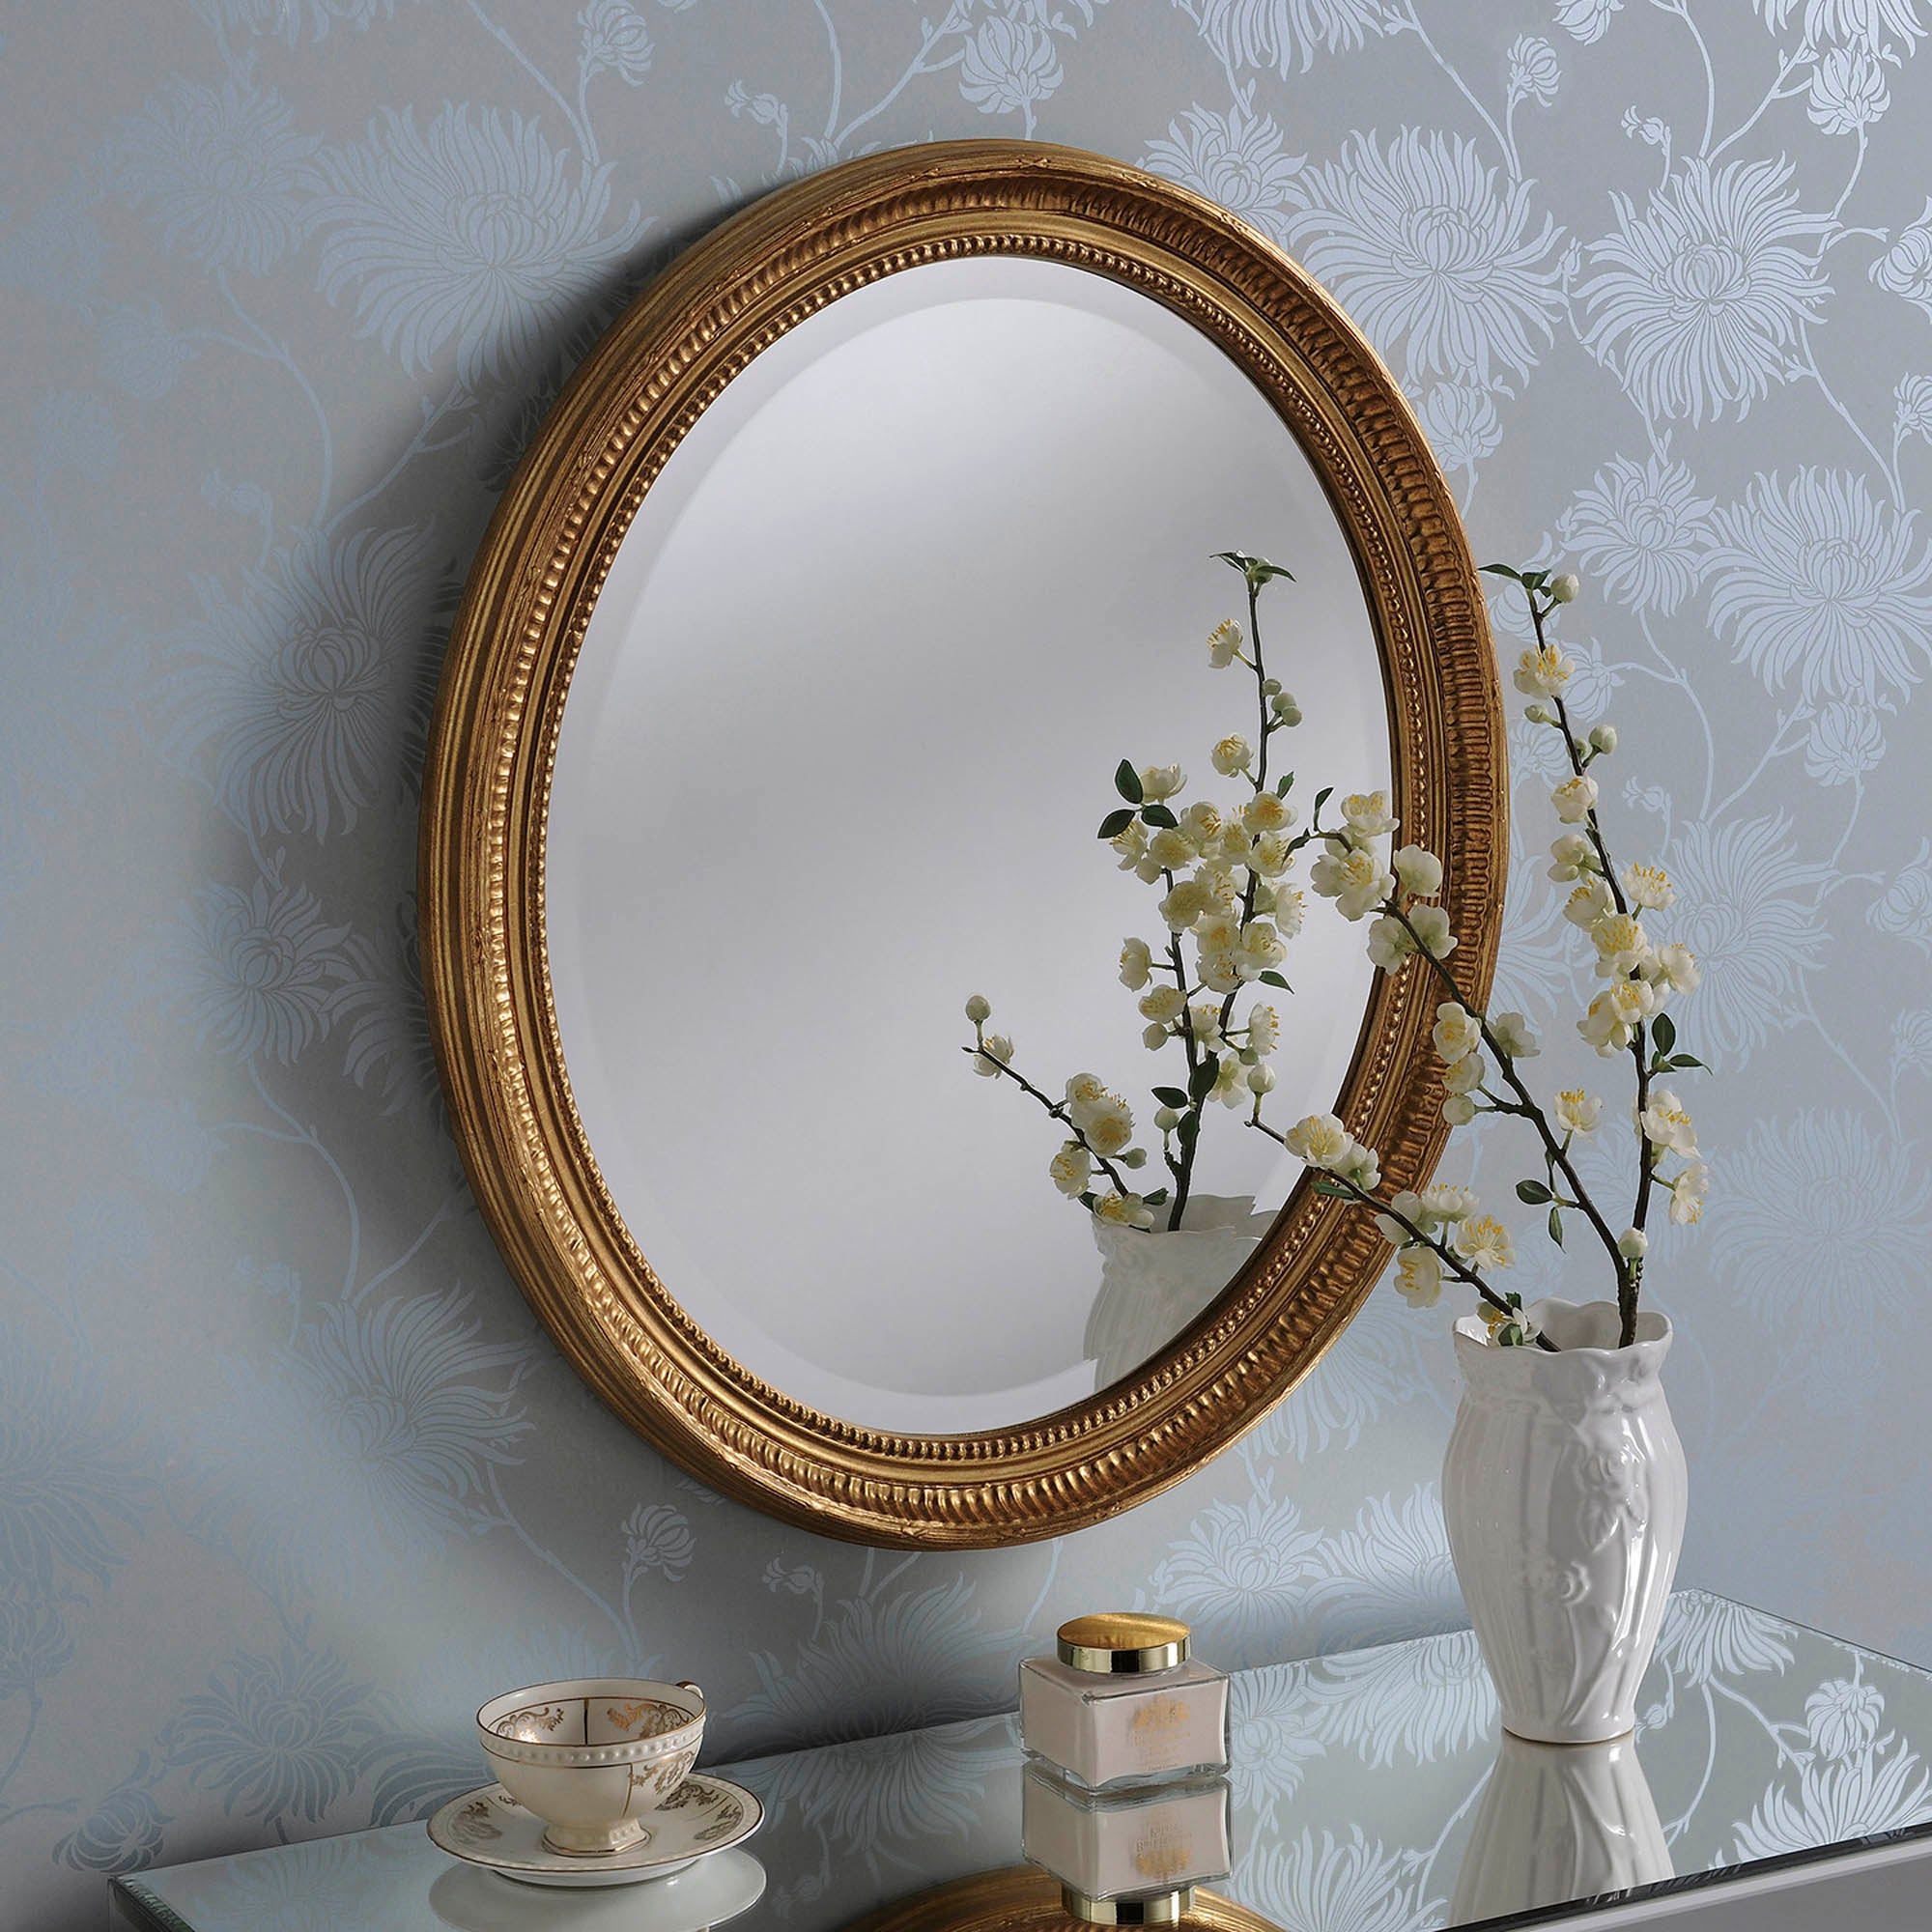 Yearn Ornate Oval Mirror Gold Effect Effect 71x61cm Gold Effect